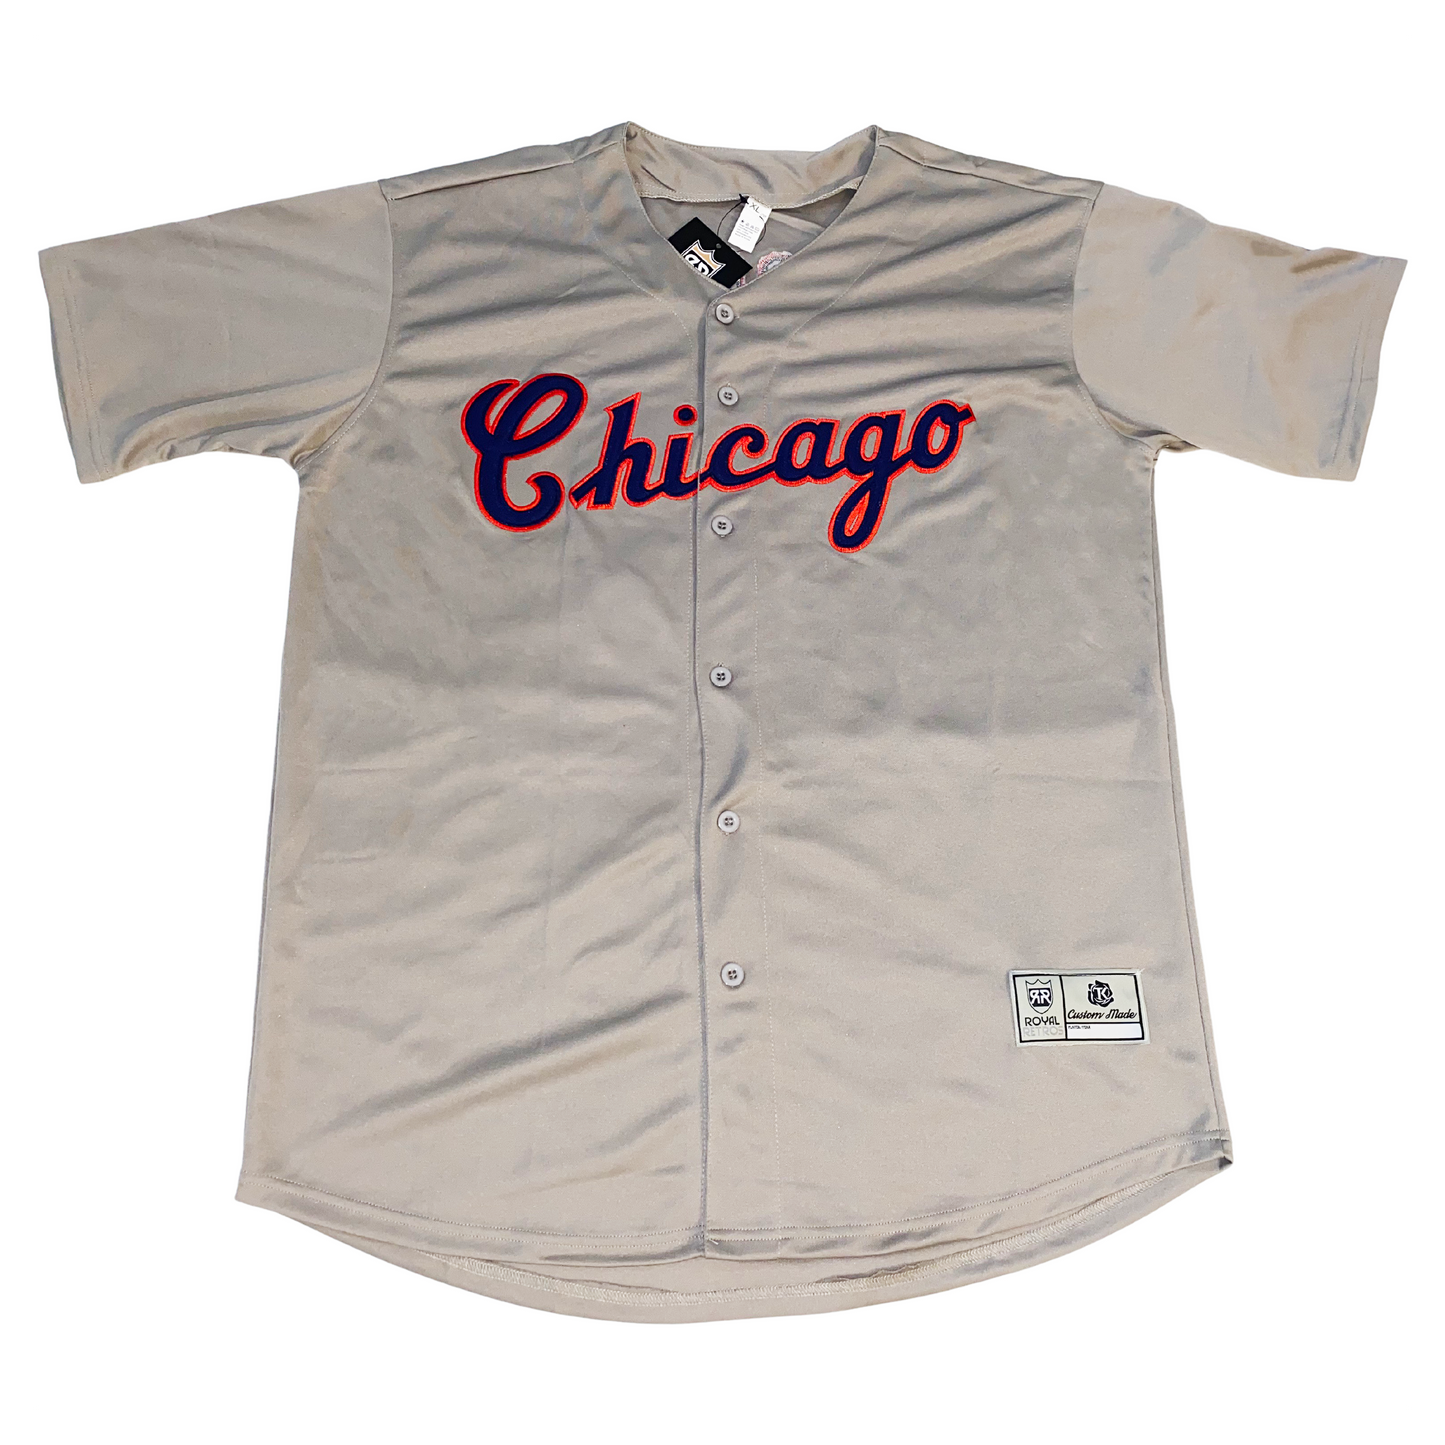 chicago white sox jersey southside